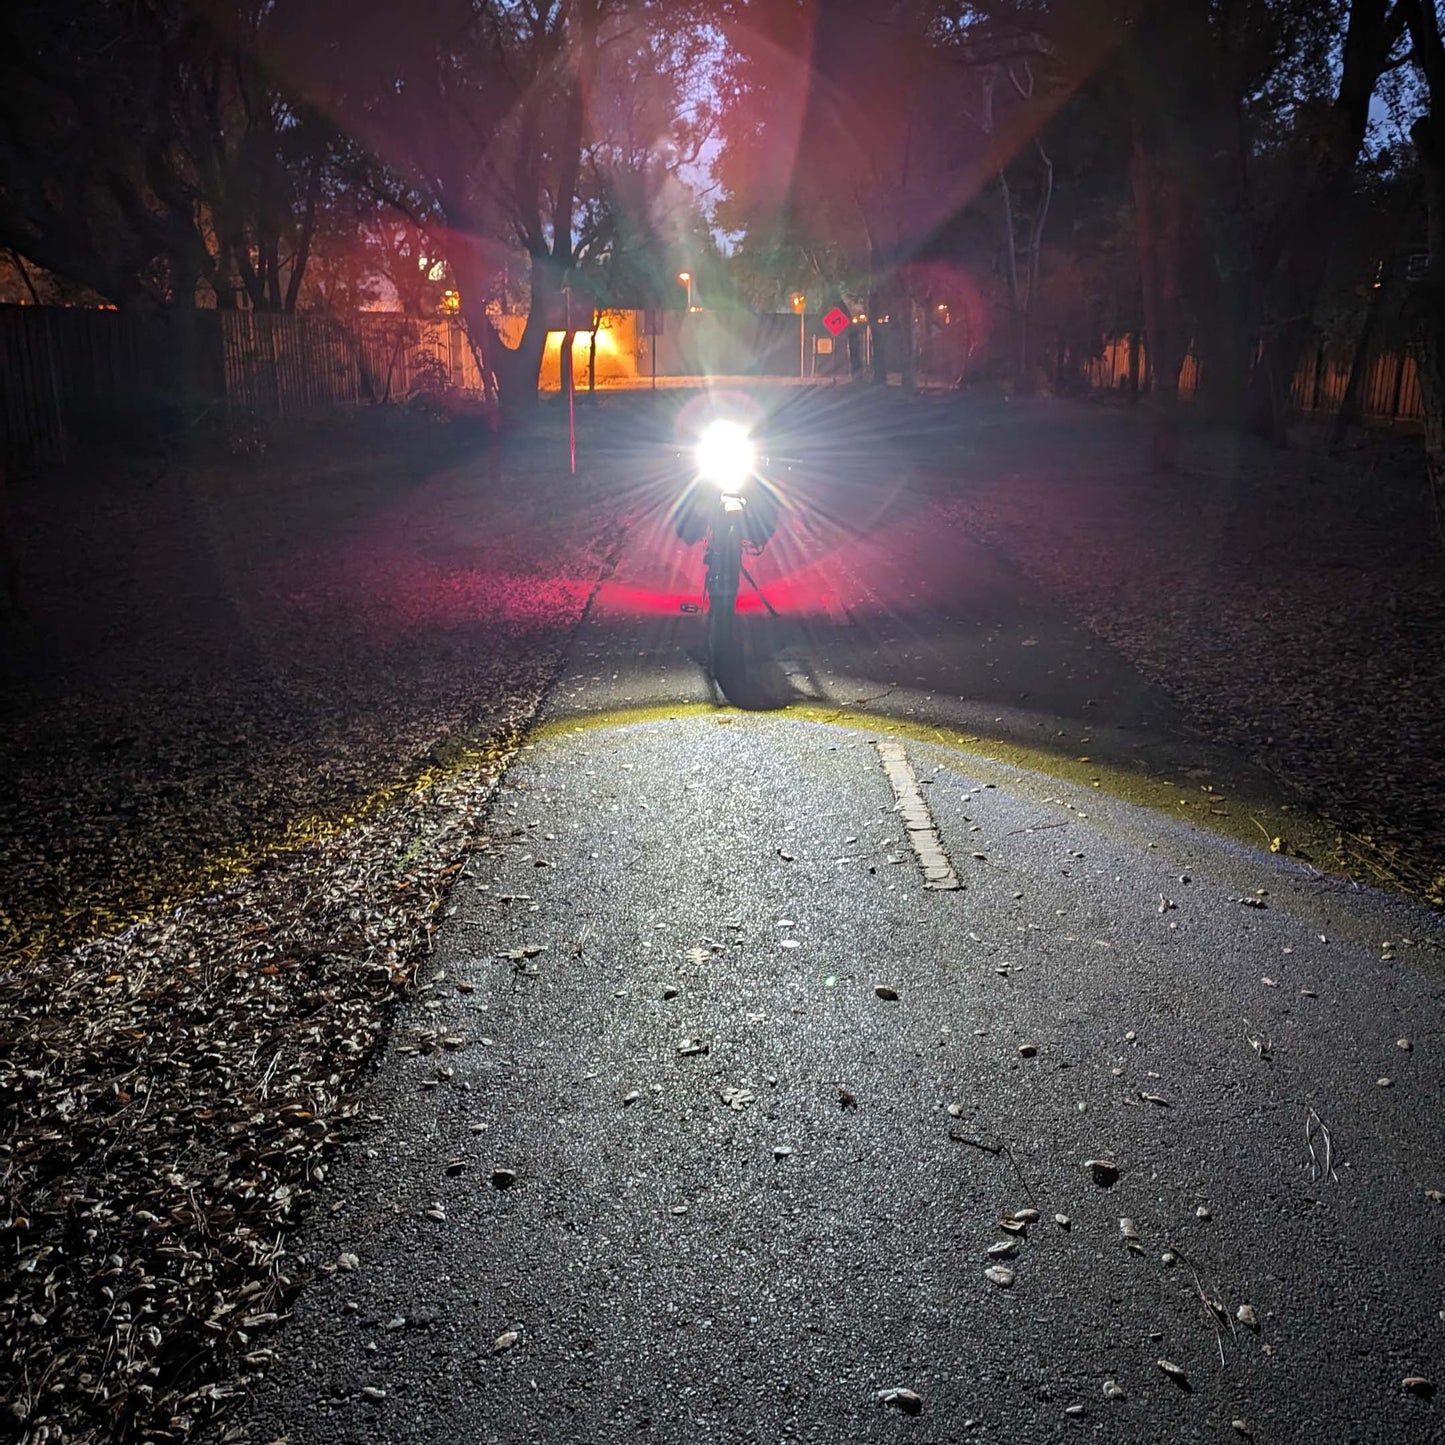 POV of the product's brightness from distance, demonstrating the bike's enhanced visibility from afar